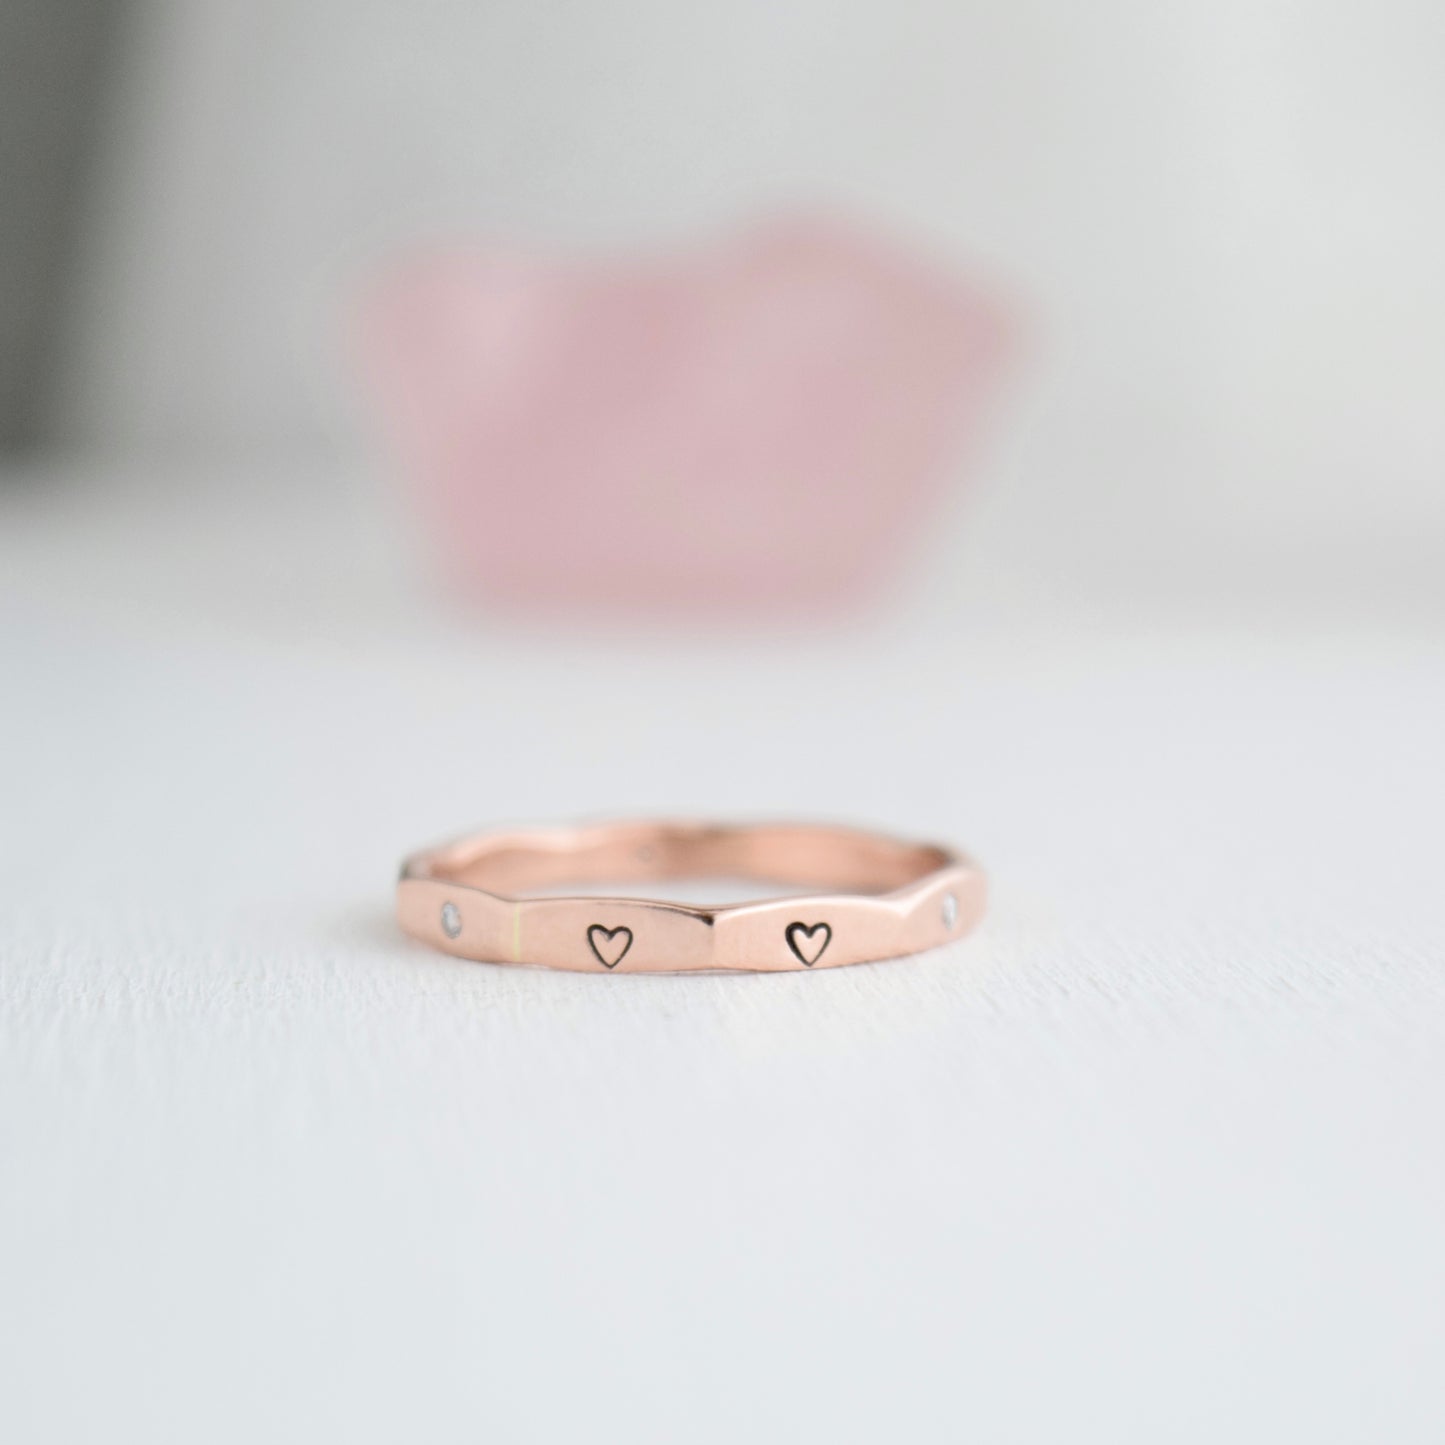 Diamond Heart Ring in 14k Solid Rose Gold size 7.5